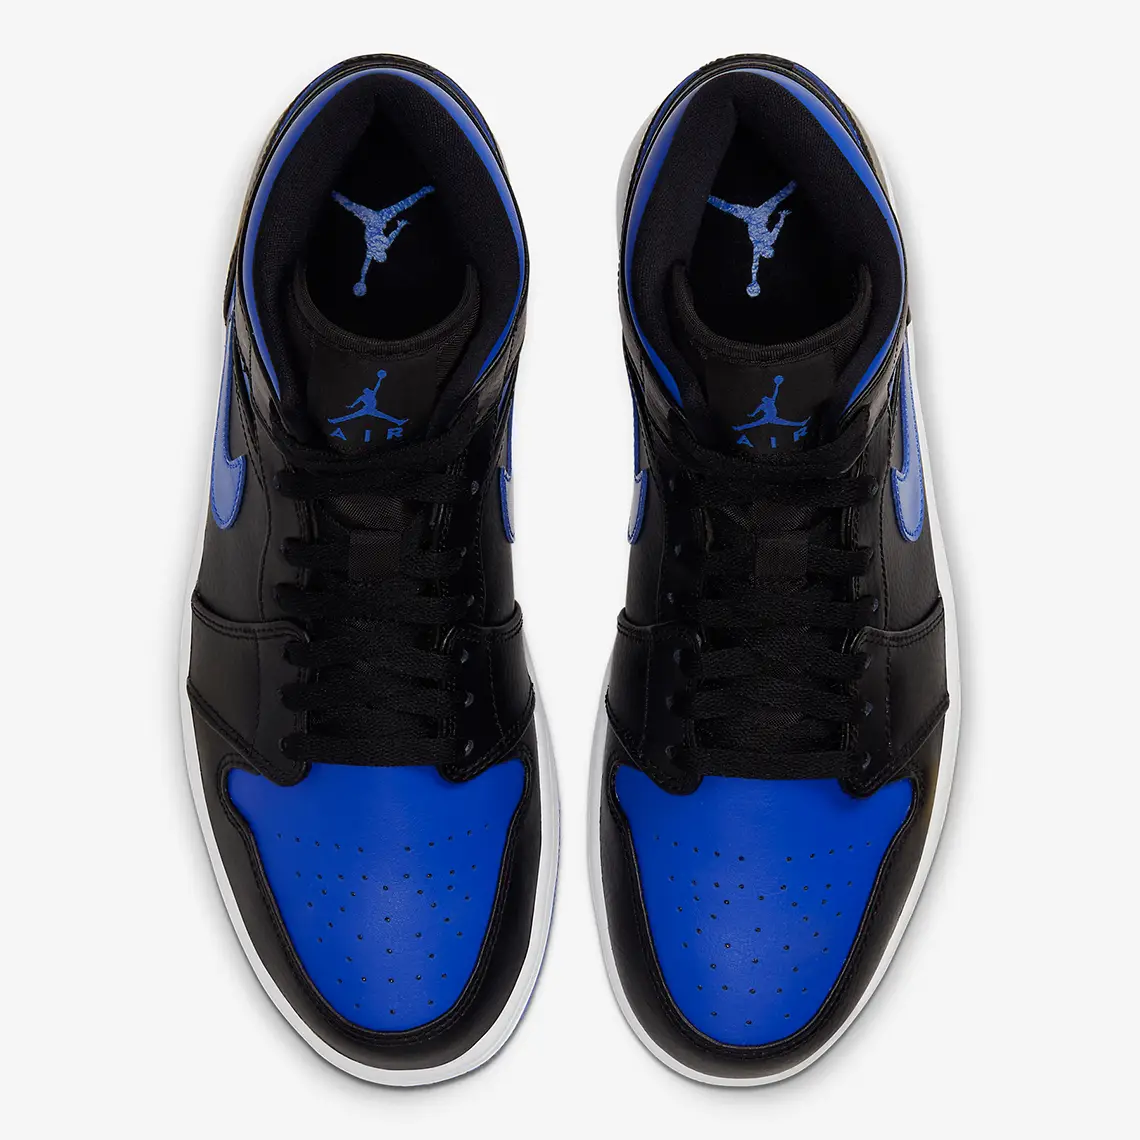 The Air Jordan 1 Has Been Officially Unveiled In A Game Royal Colourway ...